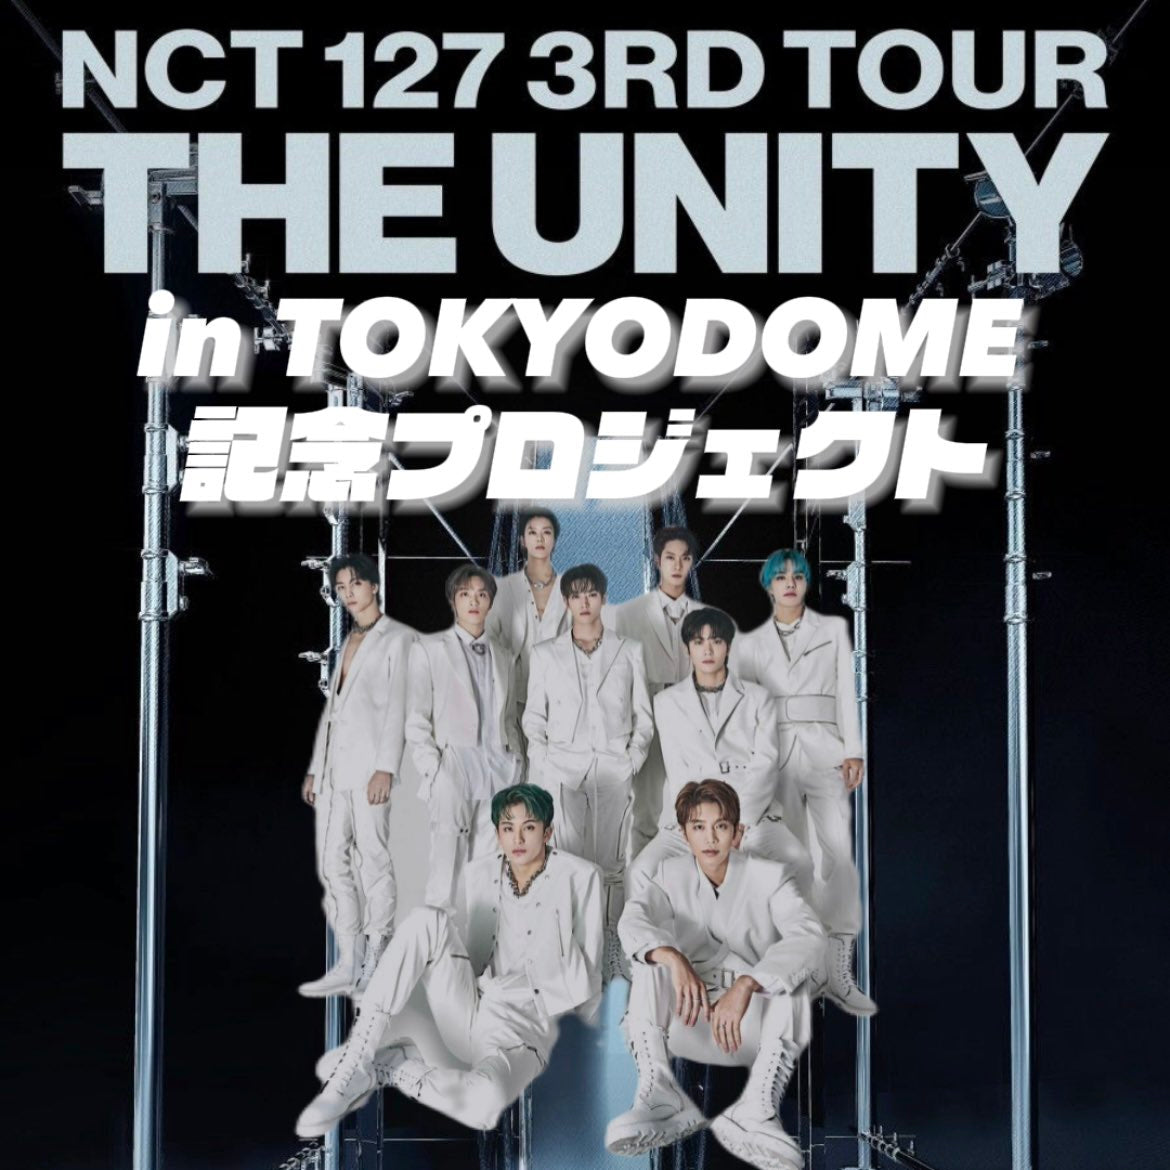 NCT127 THE GREAT UNITY 展示会 エイプリルフール ヘチャン - その他